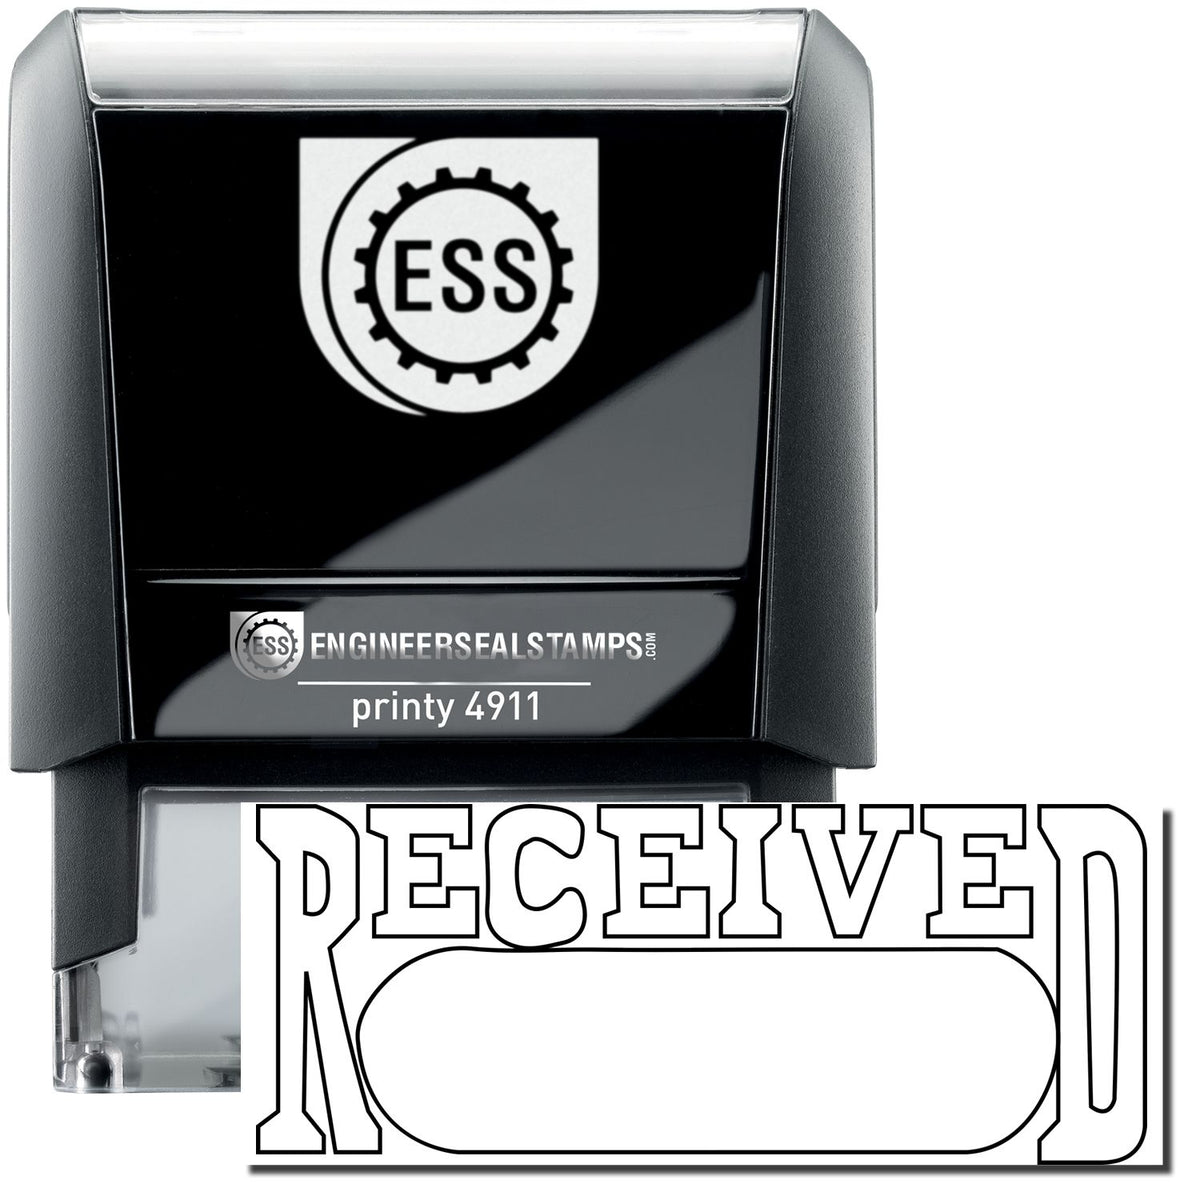 A self-inking stamp with a stamped image showing how the text &quot;RECEIVED&quot; in an outline font with a date box is displayed after stamping.